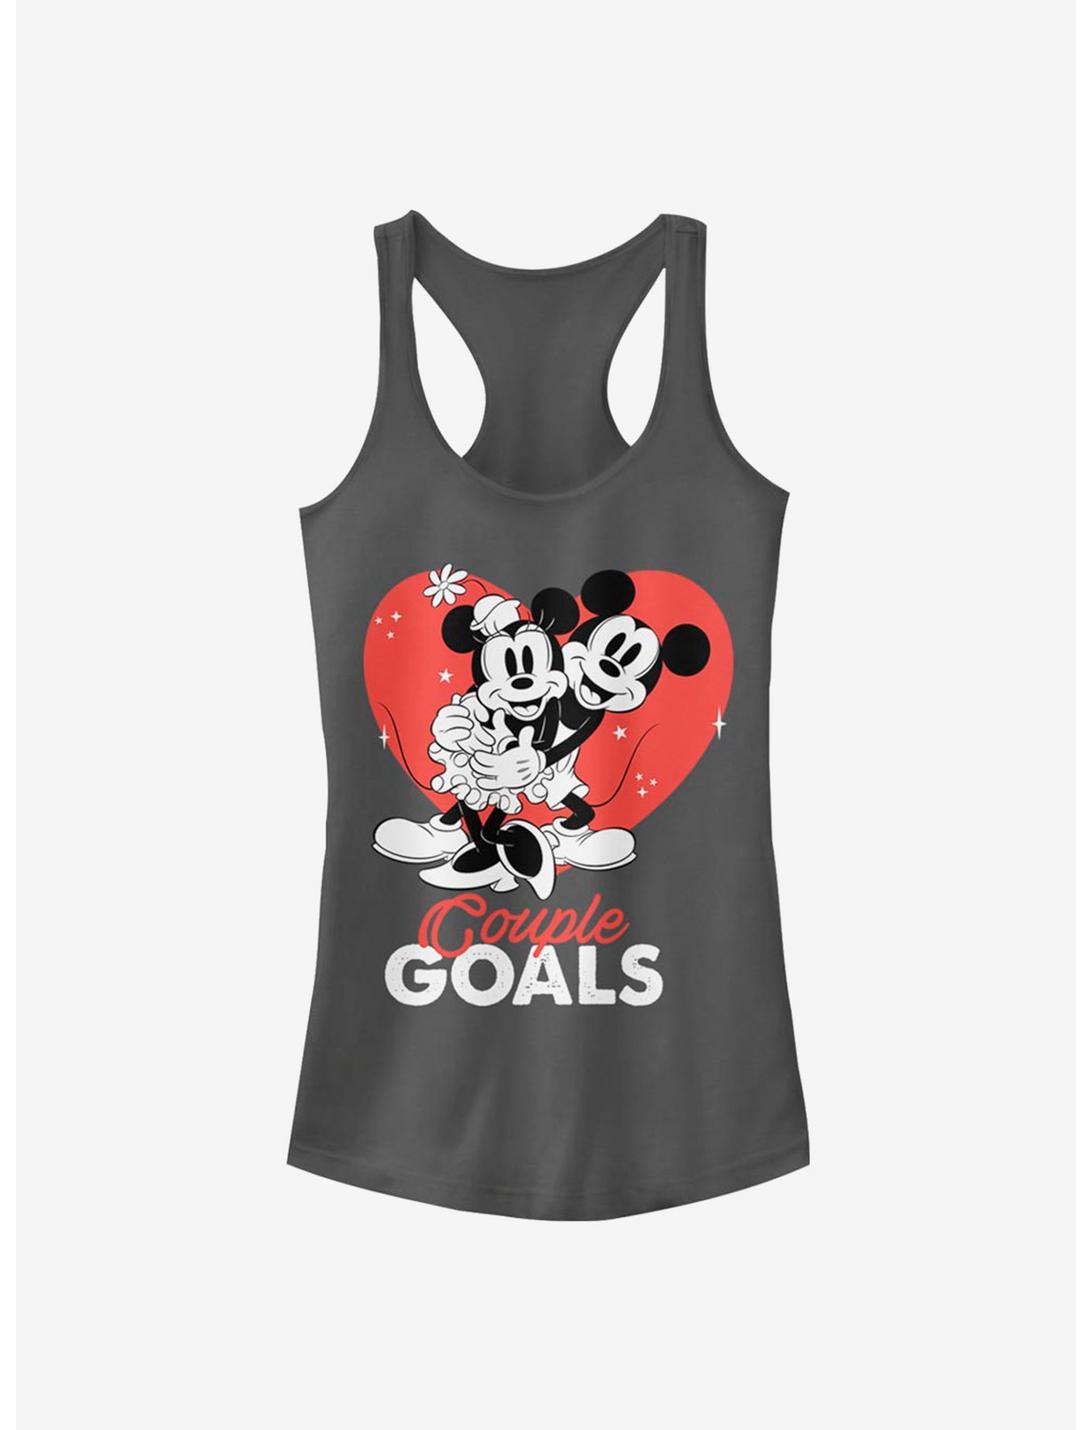 Disney Mickey Mouse & Minnie Mouse Couple Goals Girls Tank Top